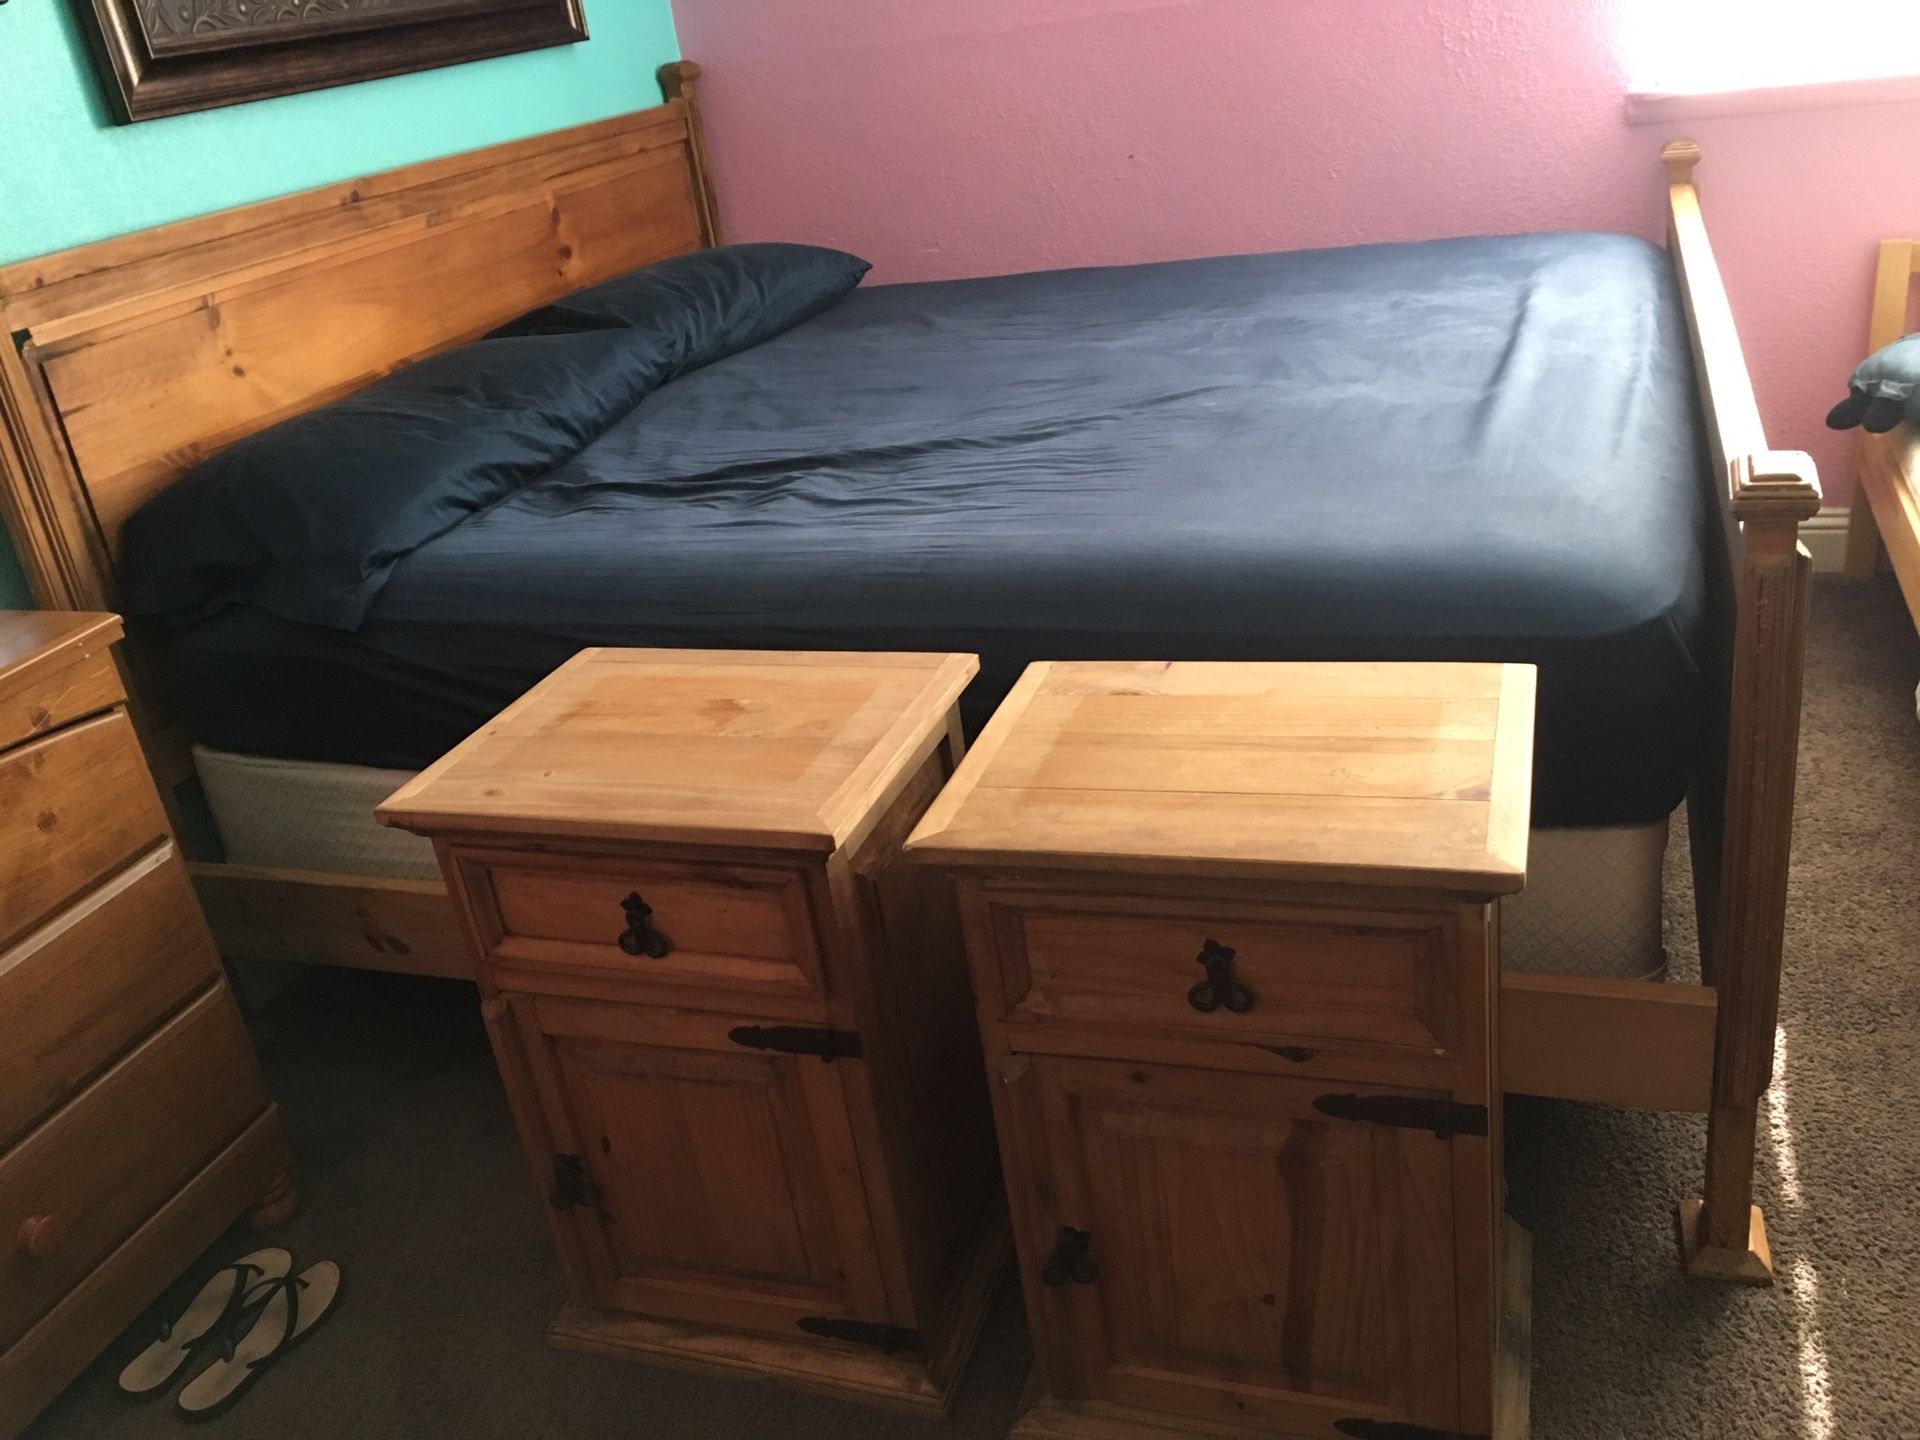 King size bed frame with two night stands